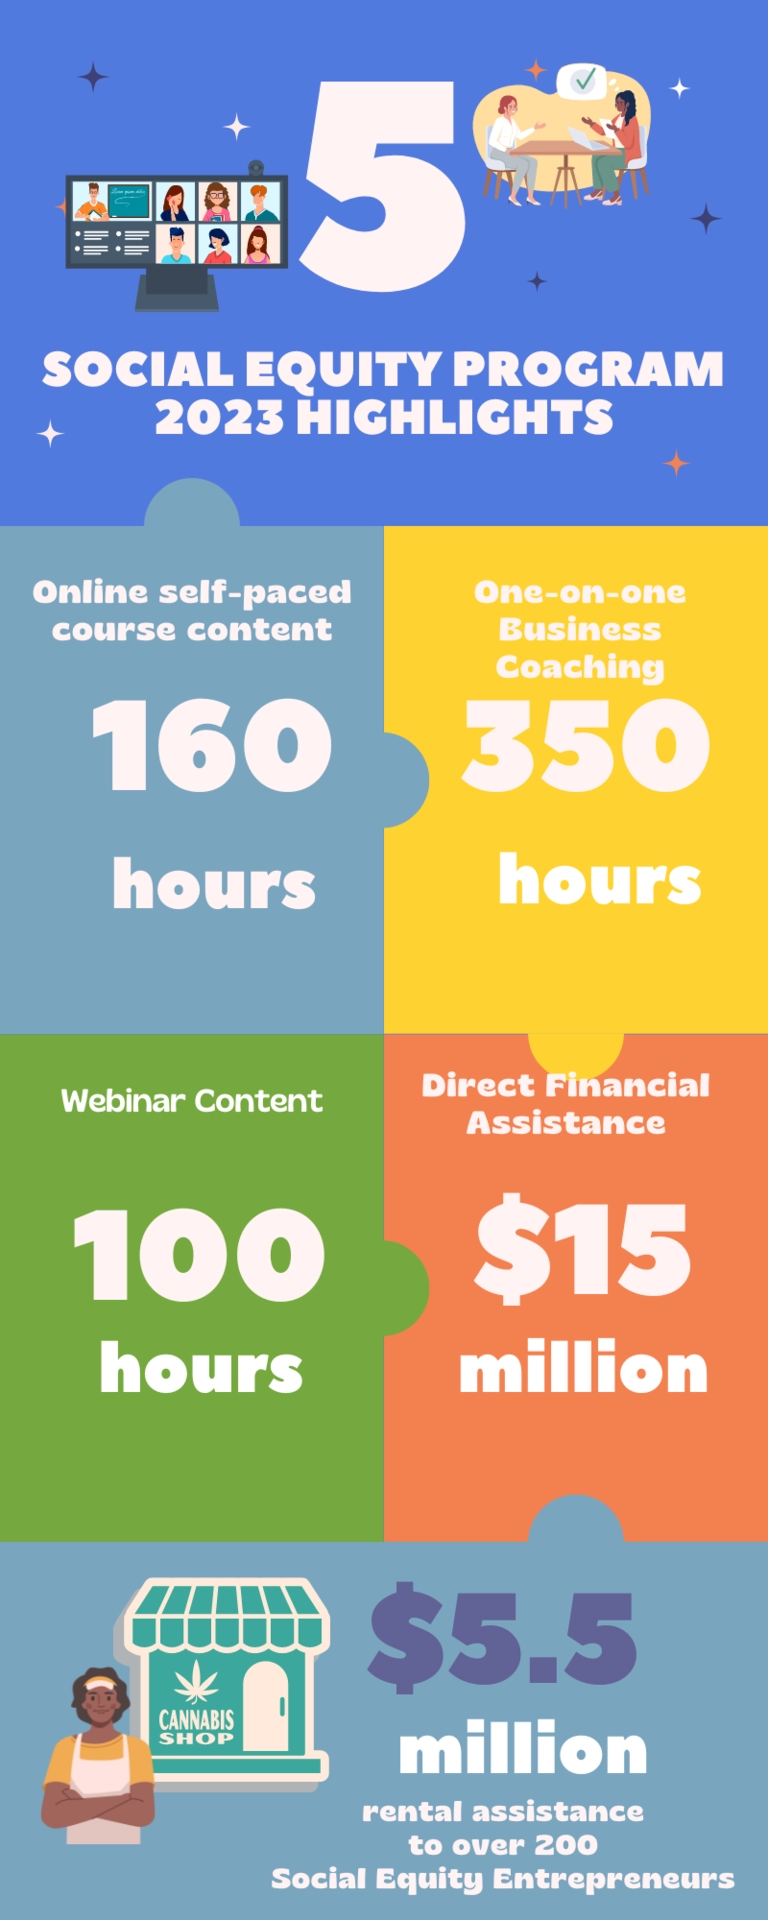 5 Social Equity Program 2023 Highlights: 160 Hours Online Self-paced Course Content; 350 Hours One-on-one Business Coaching Sessions; 100 Hours Webinar Content; $15 million Direct Financial Assistance; $5.5 million Rental Assistance to Over 200 Social Equity Entrepreneurs.